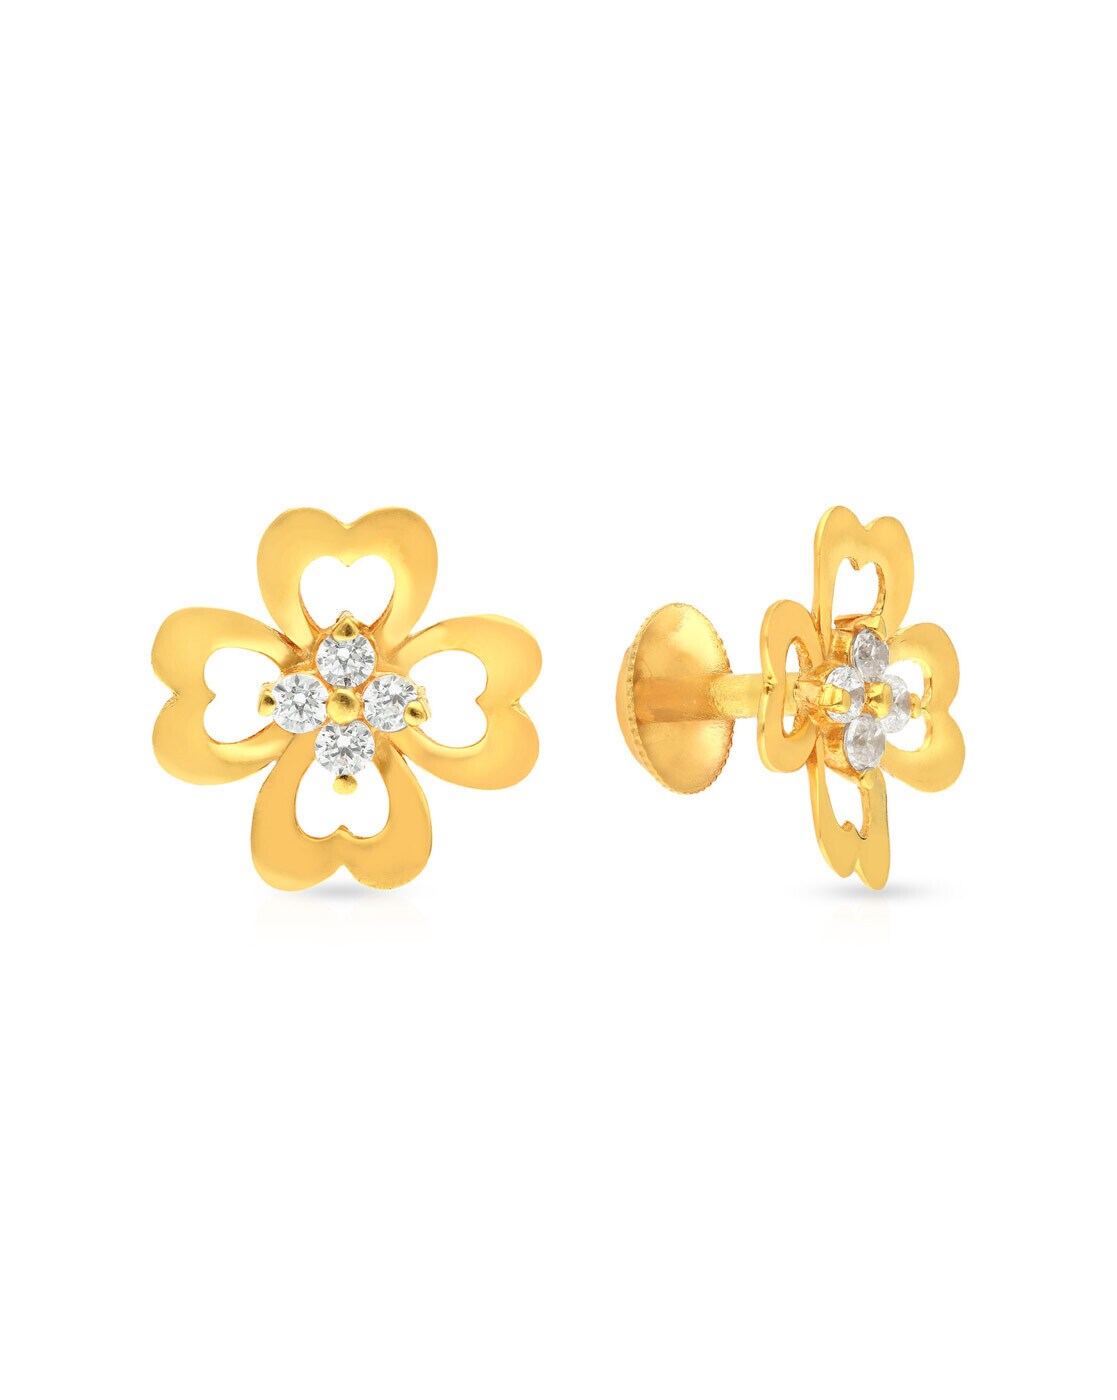 Stud gold earrings designs light weight daily wear / Malabar gold and  diamonds collections - YouTube